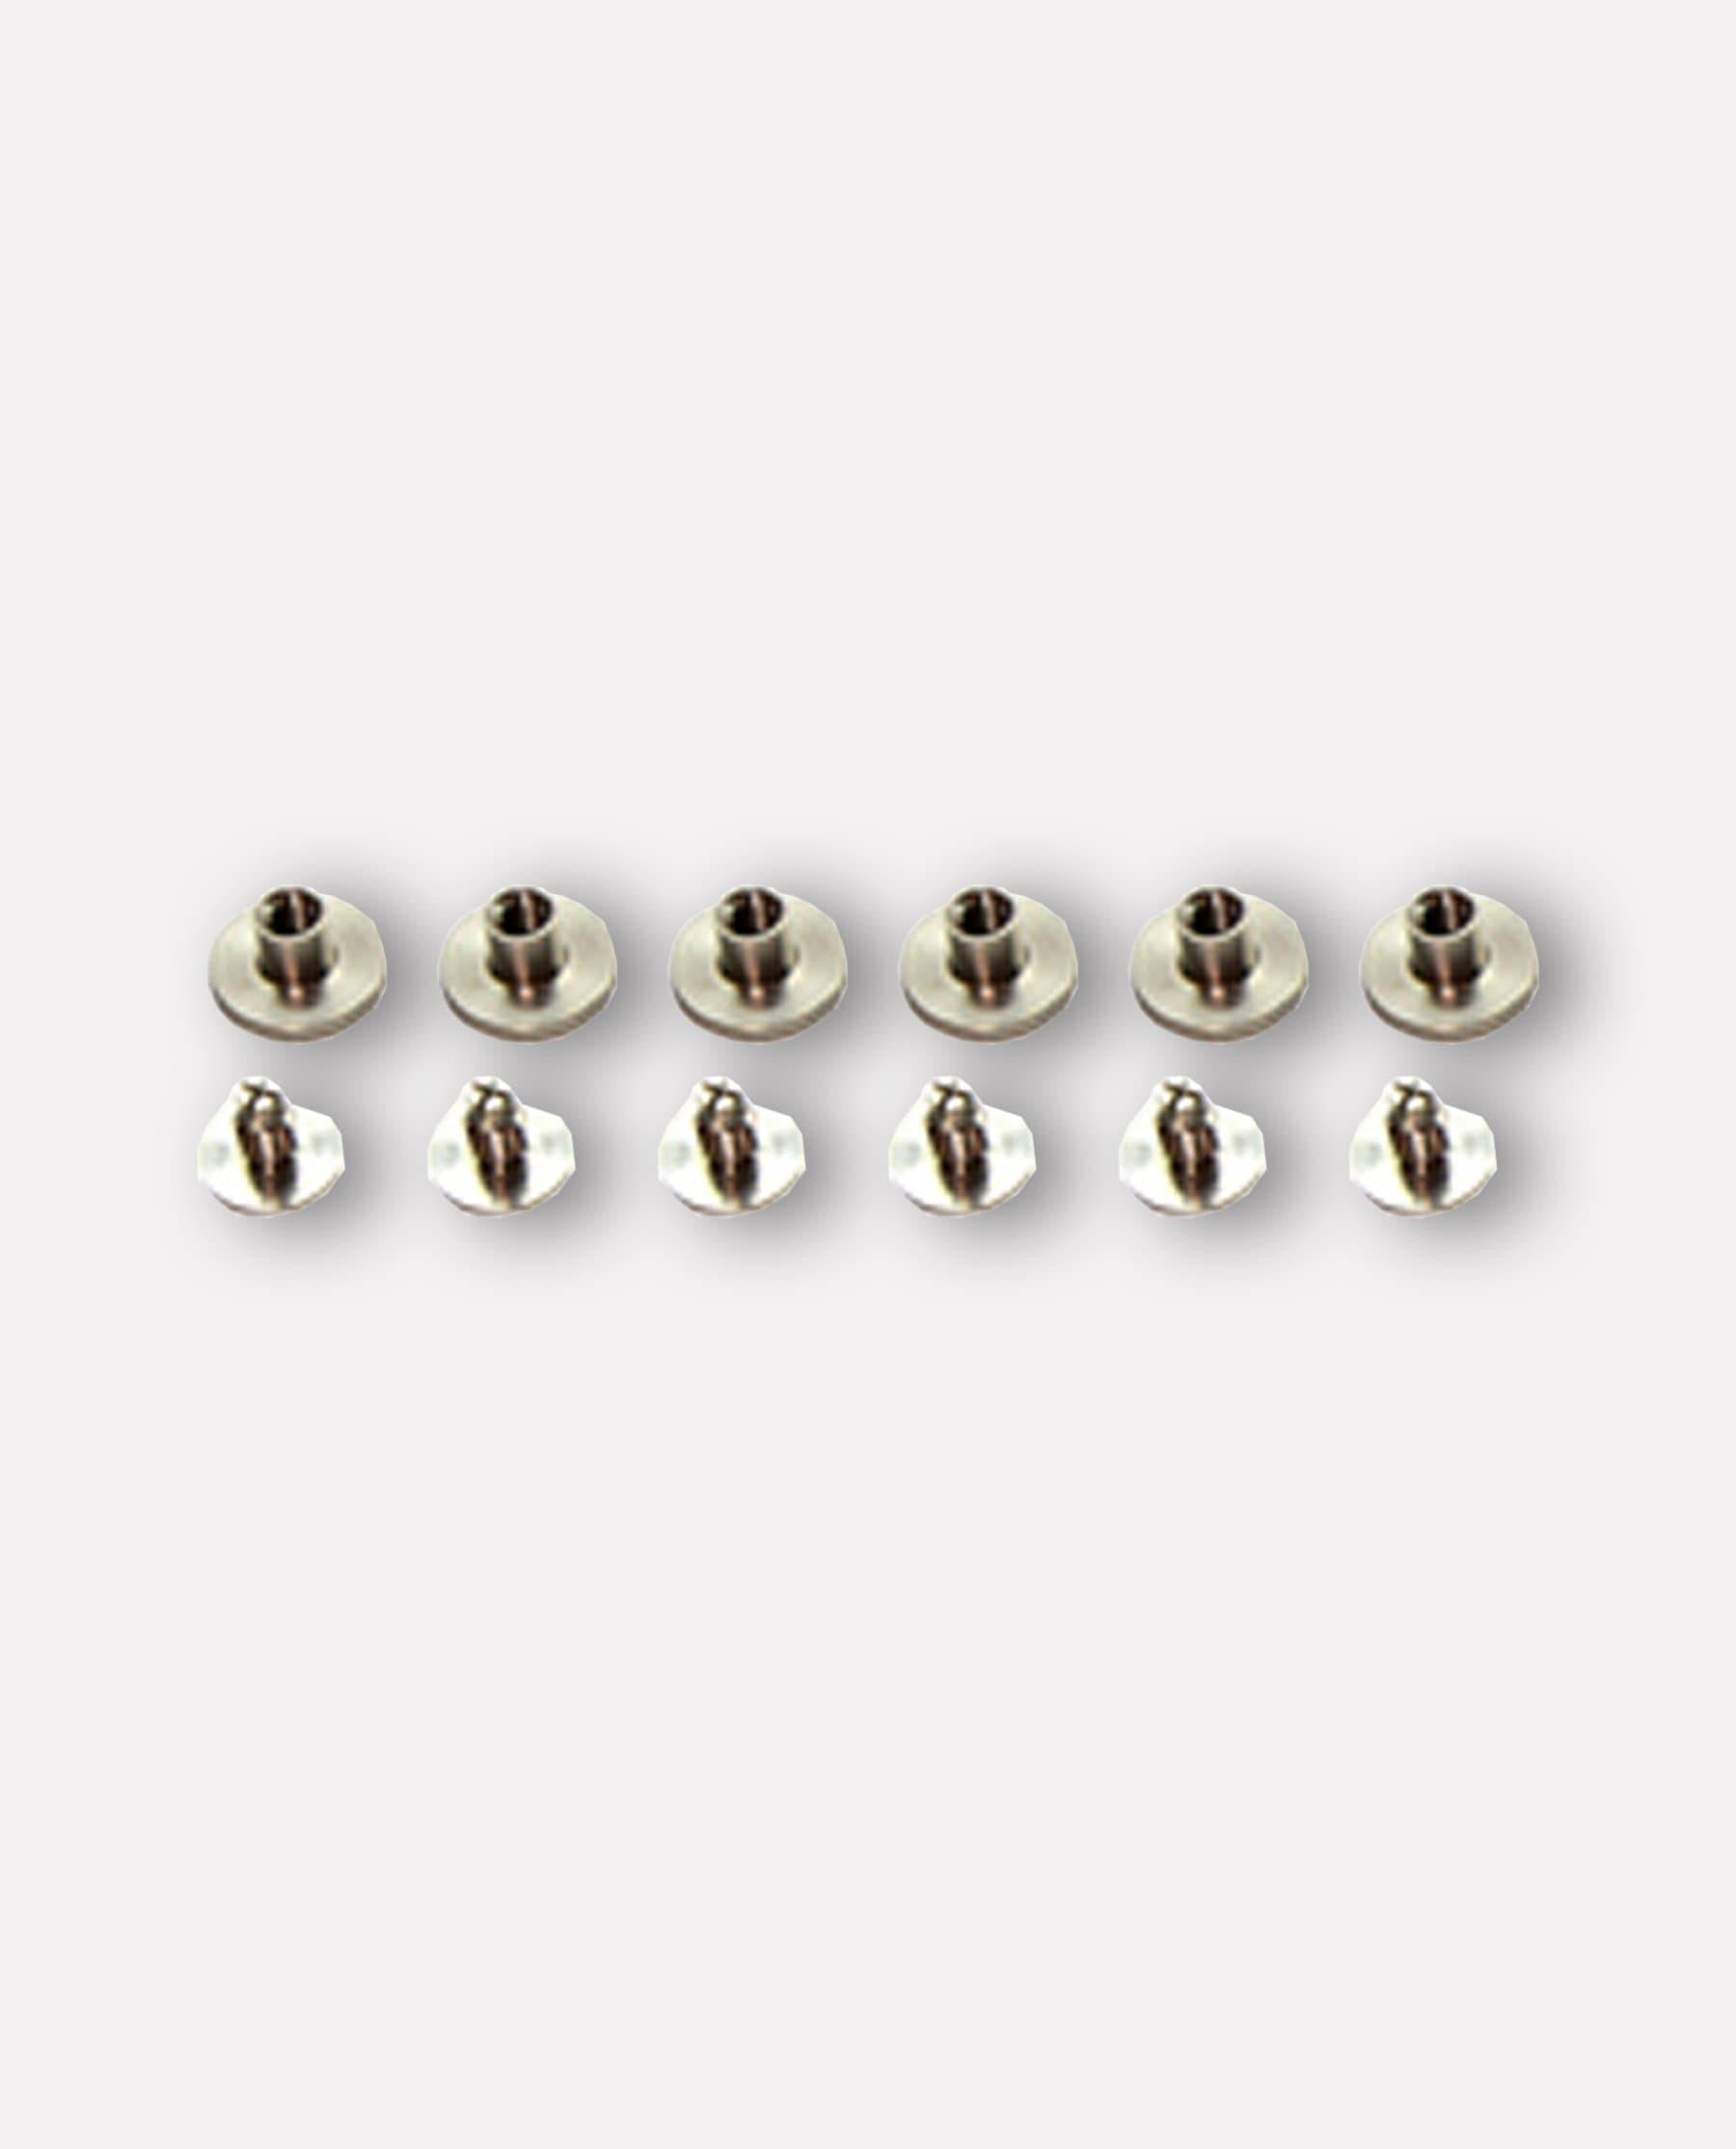 Cooper Helmet Bolts pack of 6 - Bourke Sports Limited